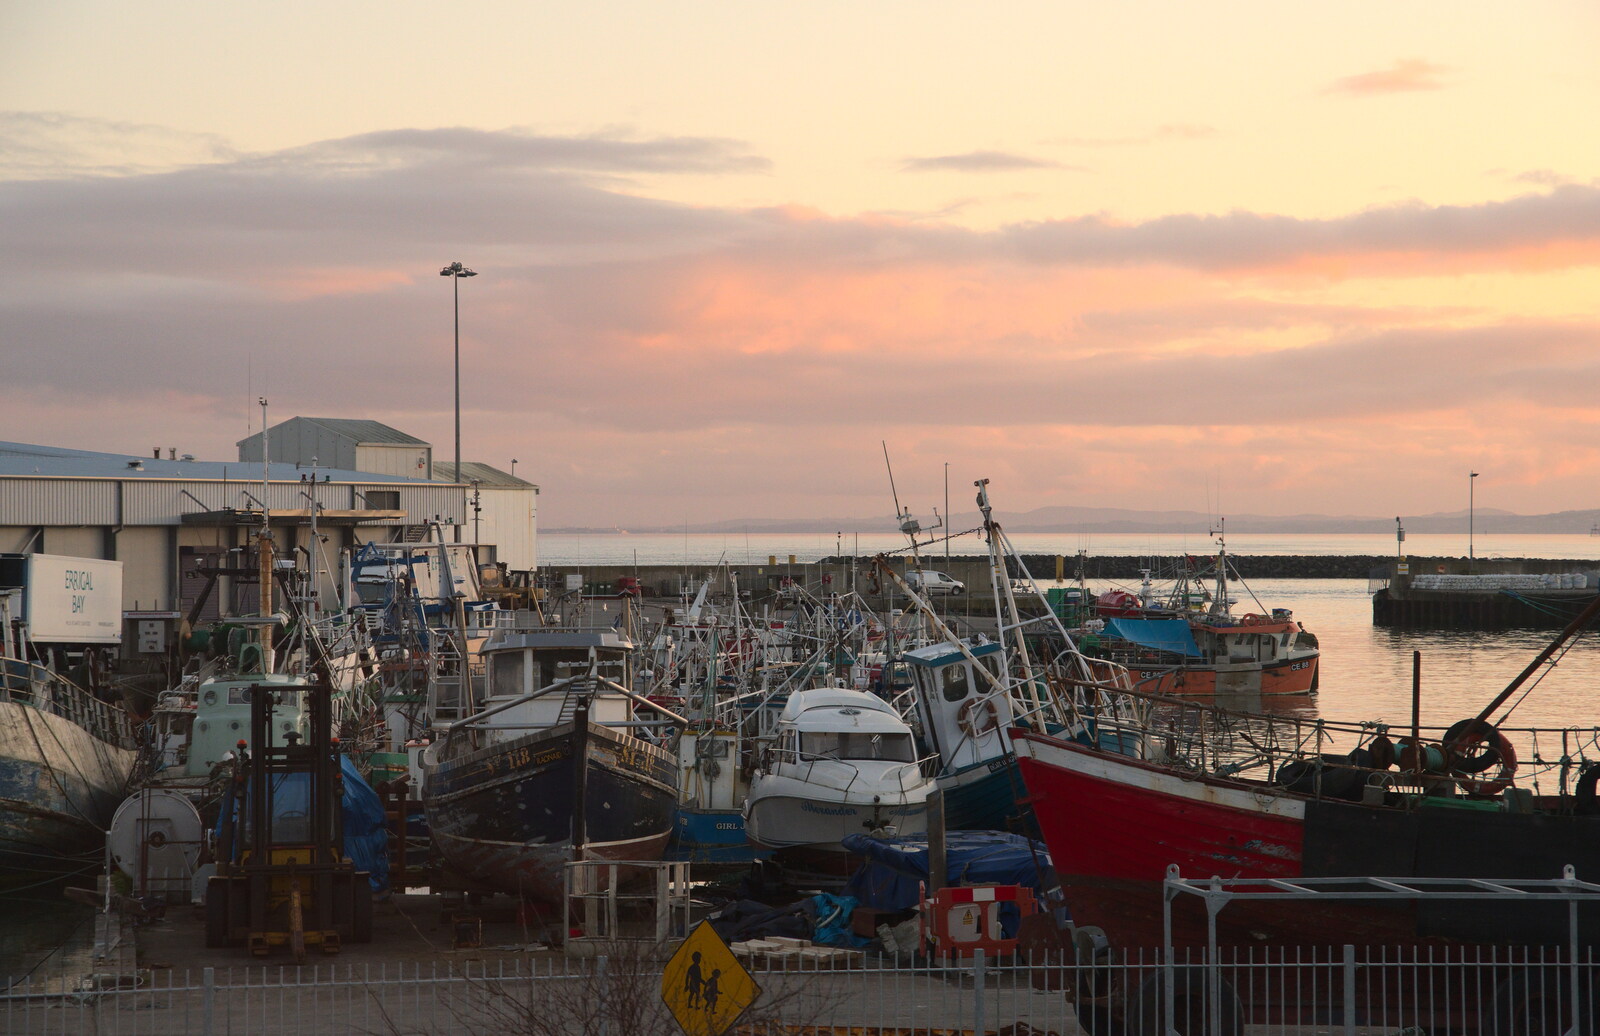 Greencastle, Doagh and Malin Head, County Donegal, Ireland - 19th April 2022: Sunset over Greencastle harbour